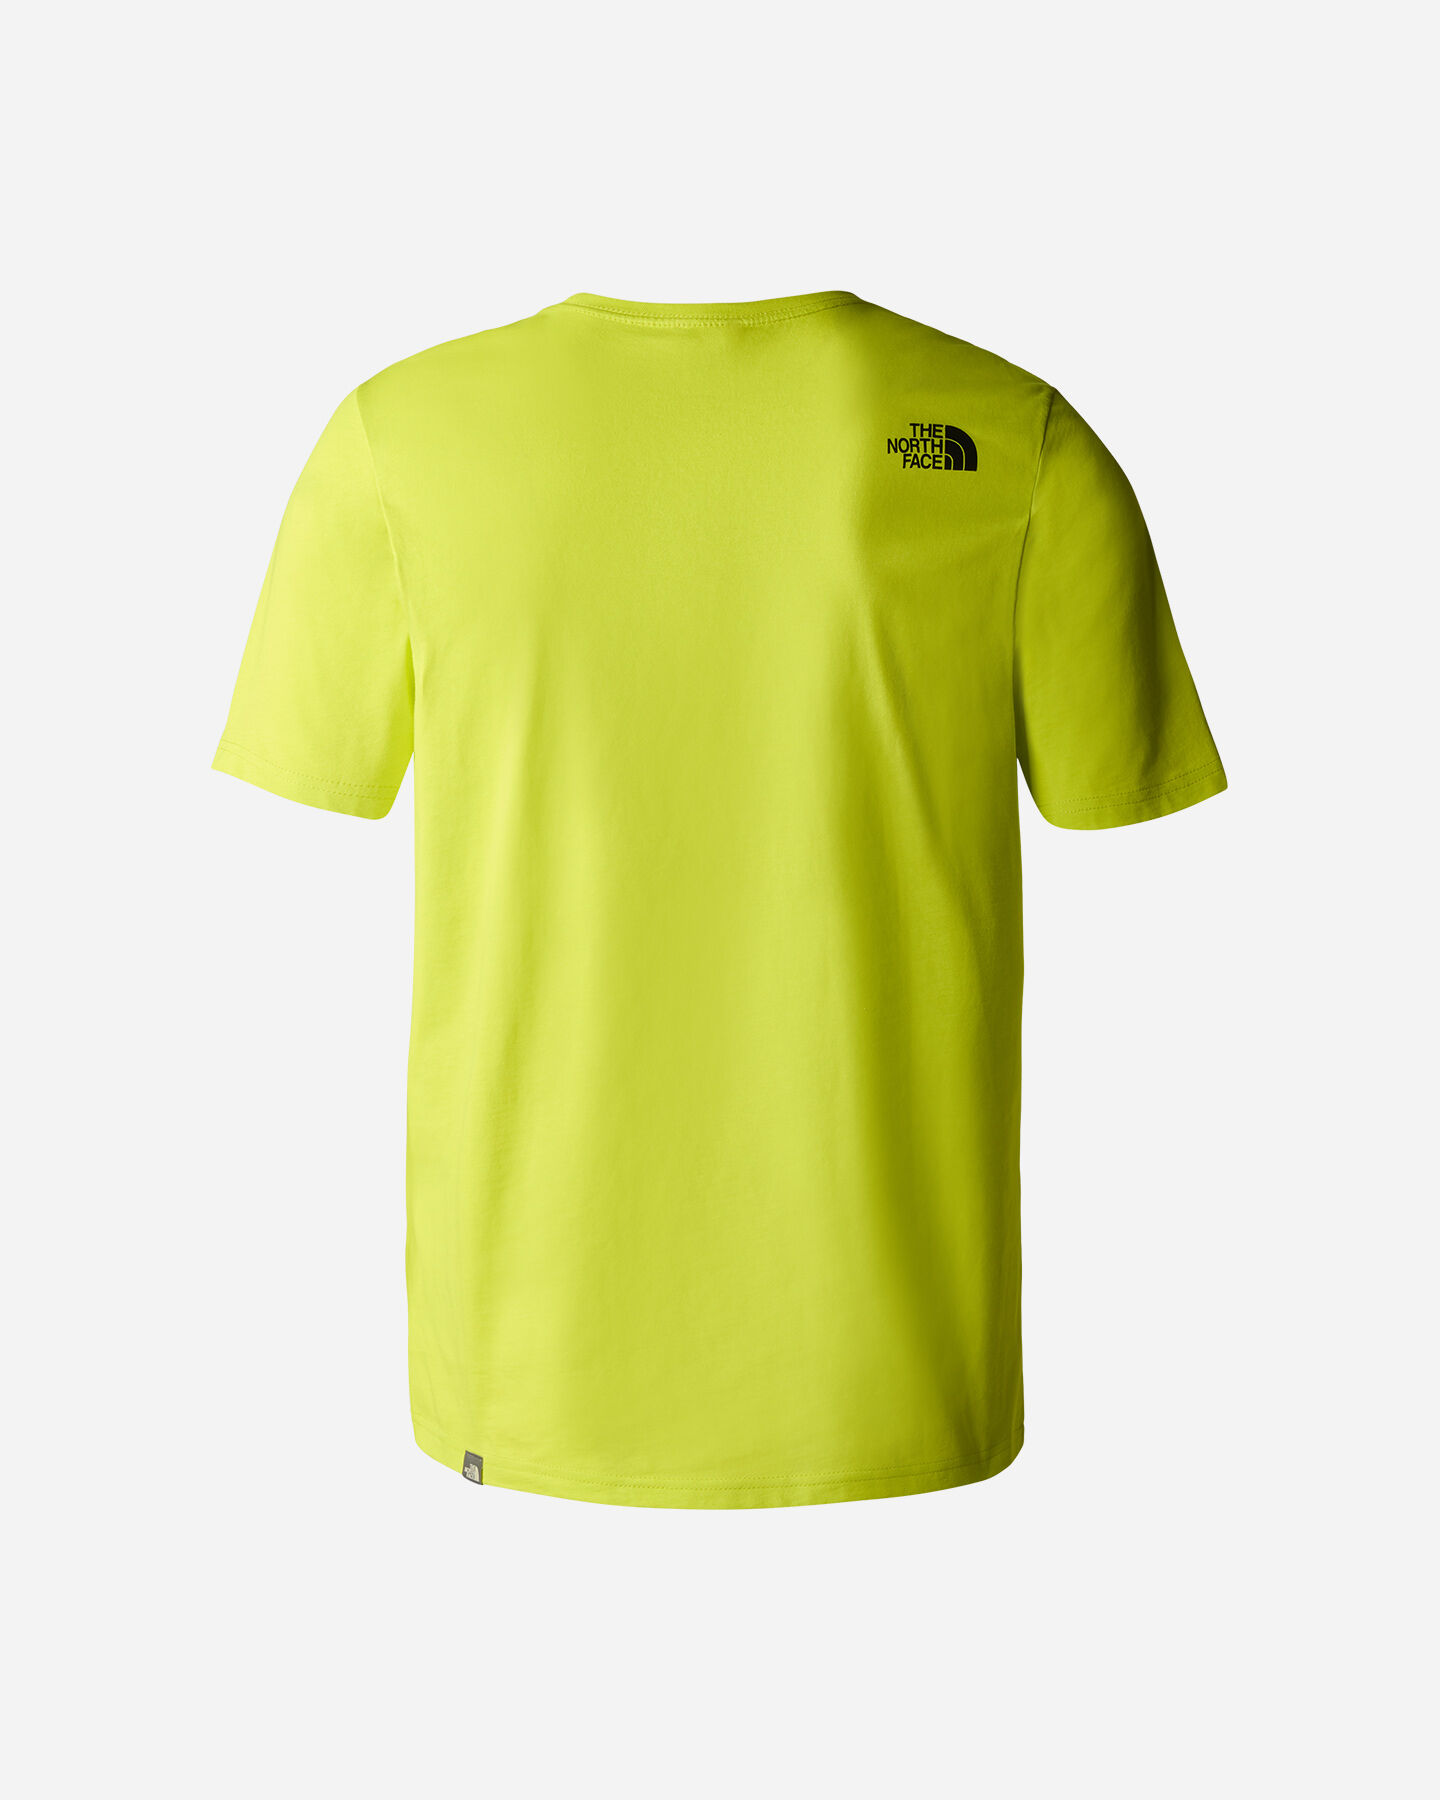  T-Shirt THE NORTH FACE EASY BIG LOGO M S5535605|8NT|S scatto 1